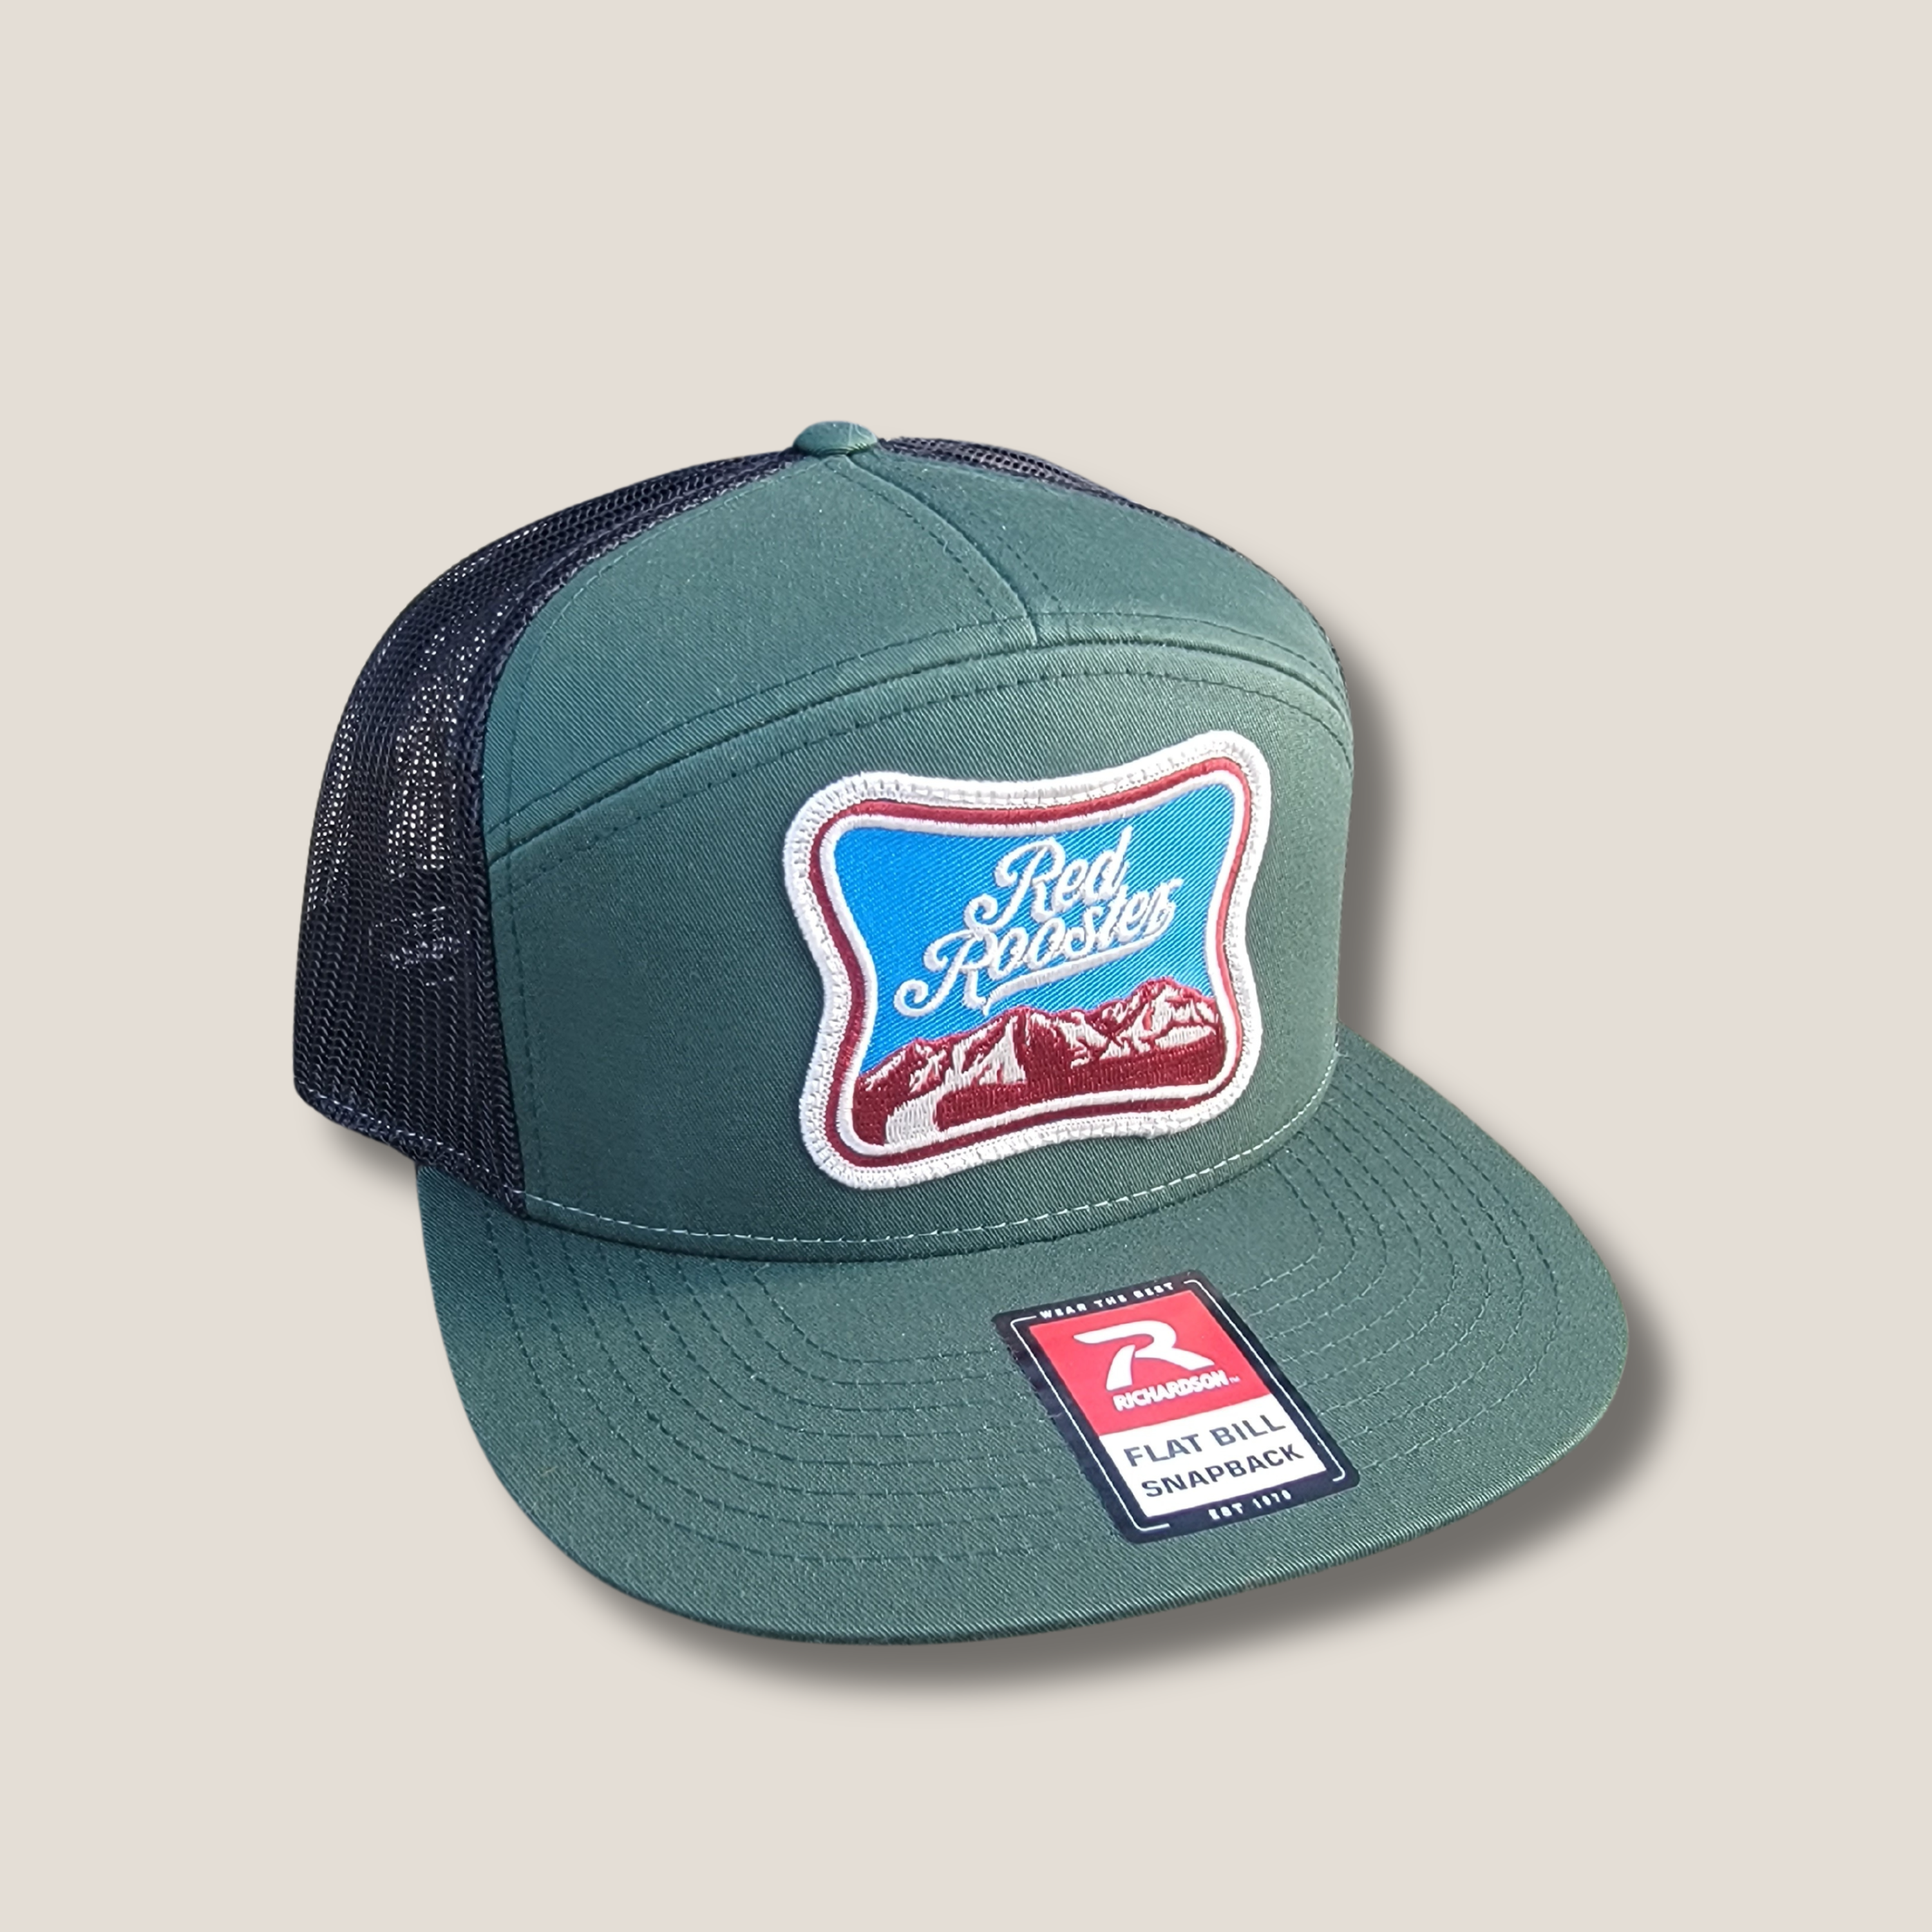 Trucker Hat - Red Rooster Coffee